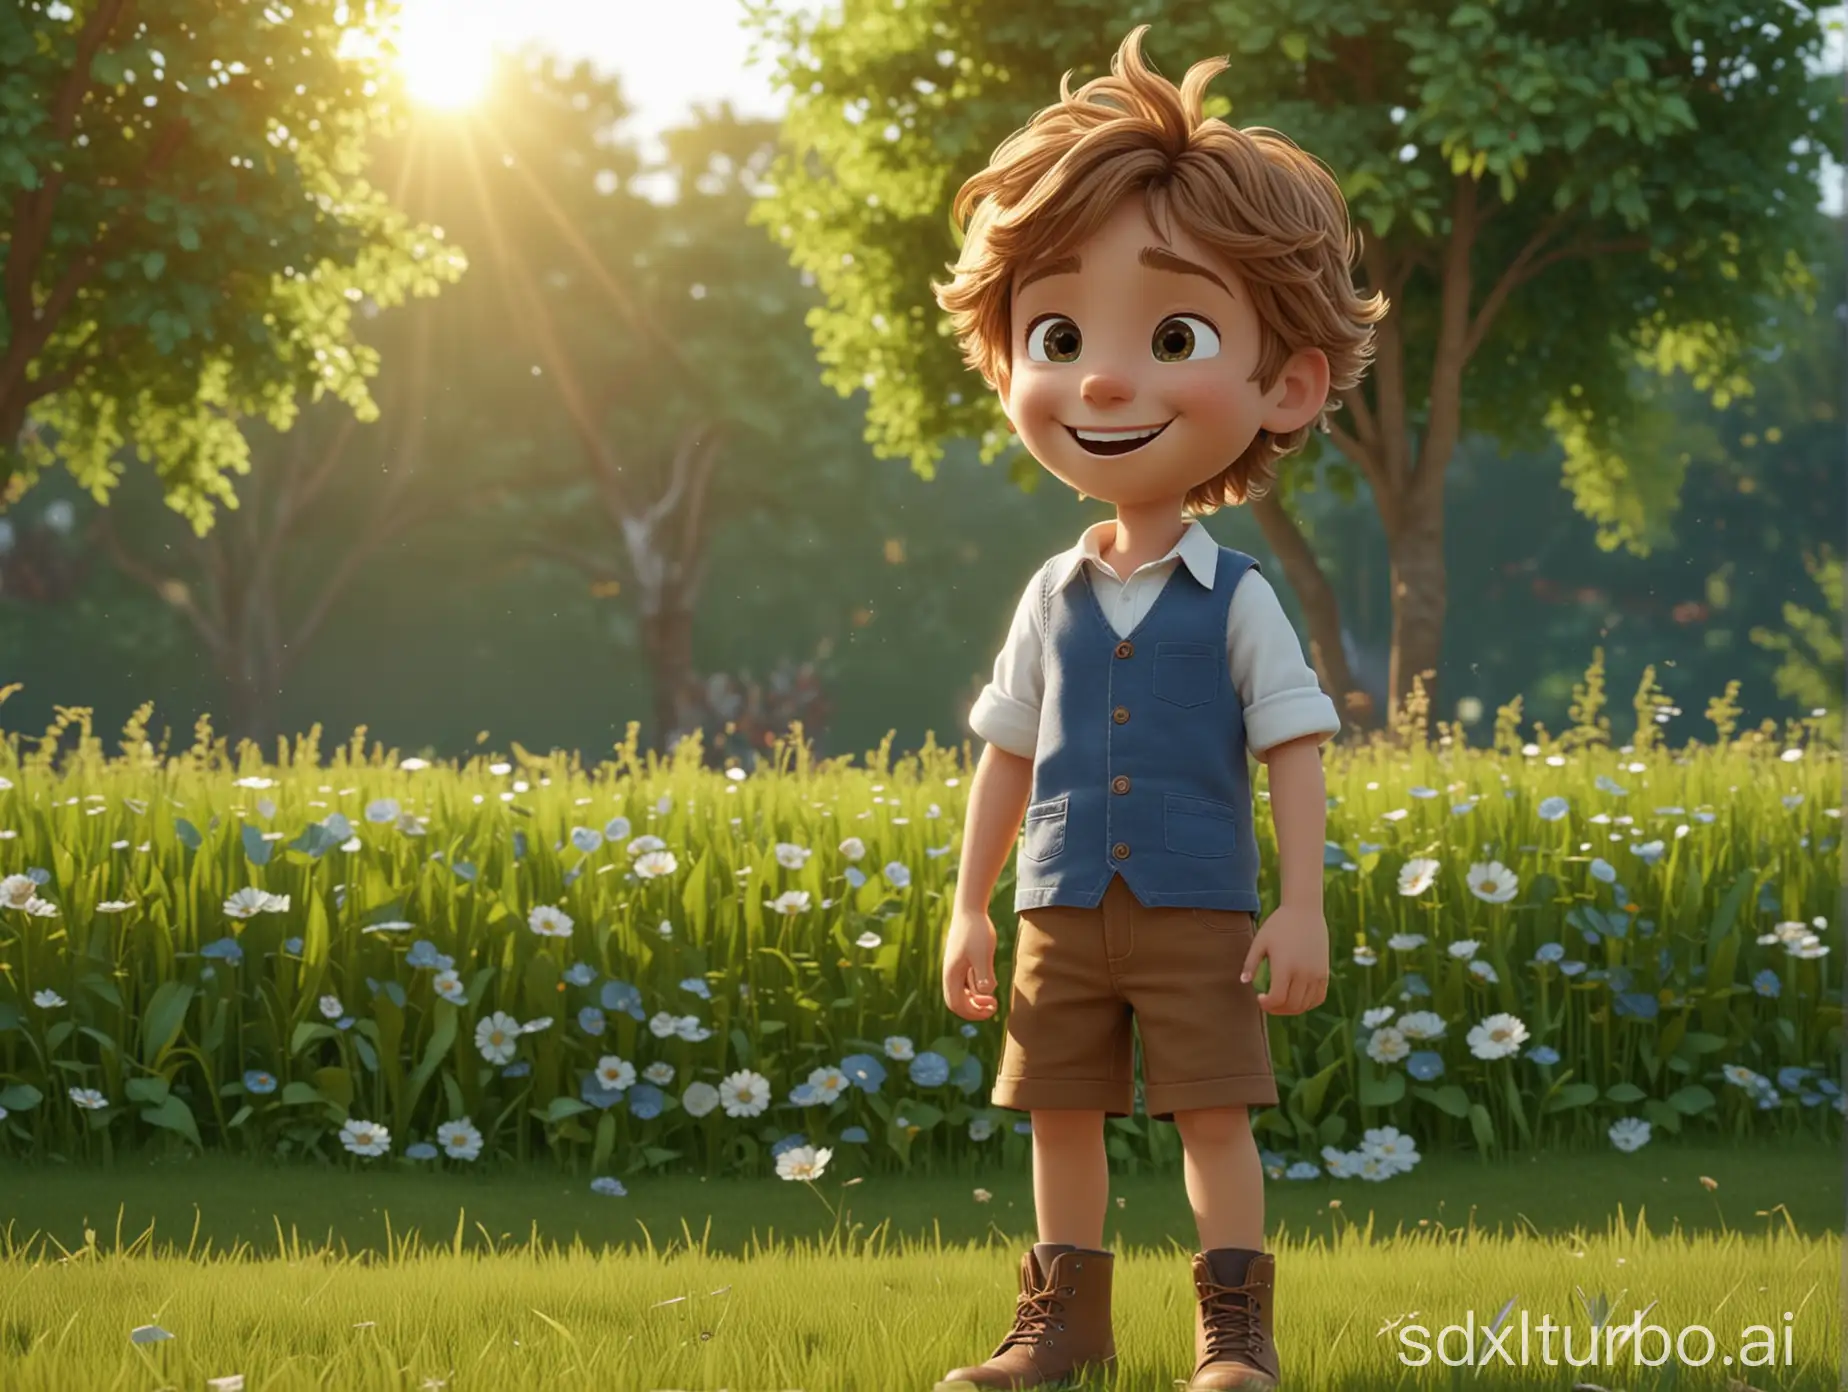 GoldenHaired-Boy-Storytelling-with-Friends-in-HighDefinition-3D-Animation-Style